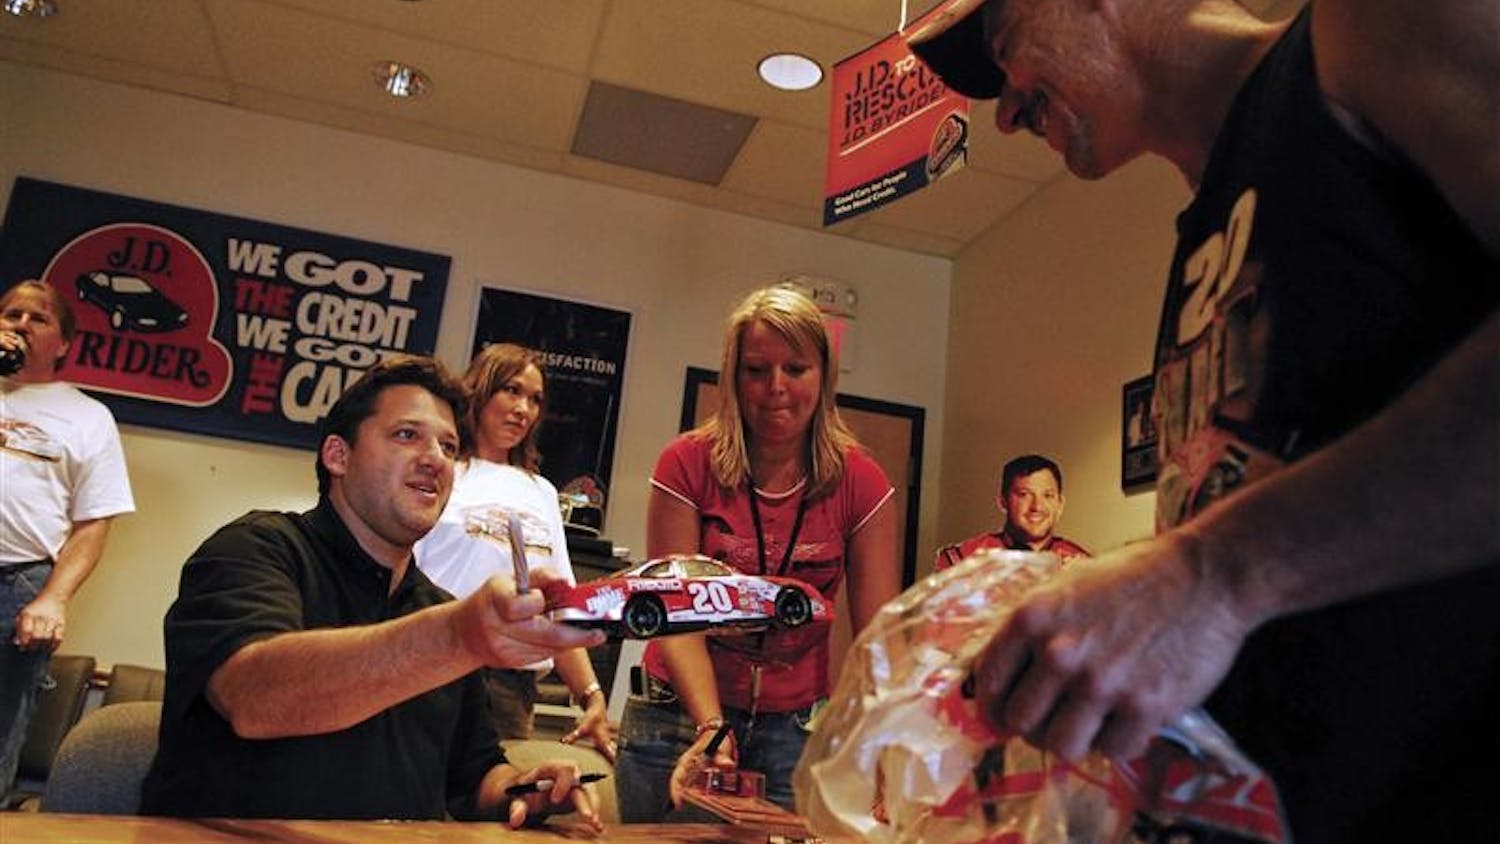 Bloomfield resident Mike Brucell got NASCAR driver Tony Stewart's autograph Thursday night at the J.D. Byrider Auto Sales Bloomington location. Brucell called Stewart his "favorite driver" and said he's been following the Columbus, Ind.-native since his rookie season in NASCAR.